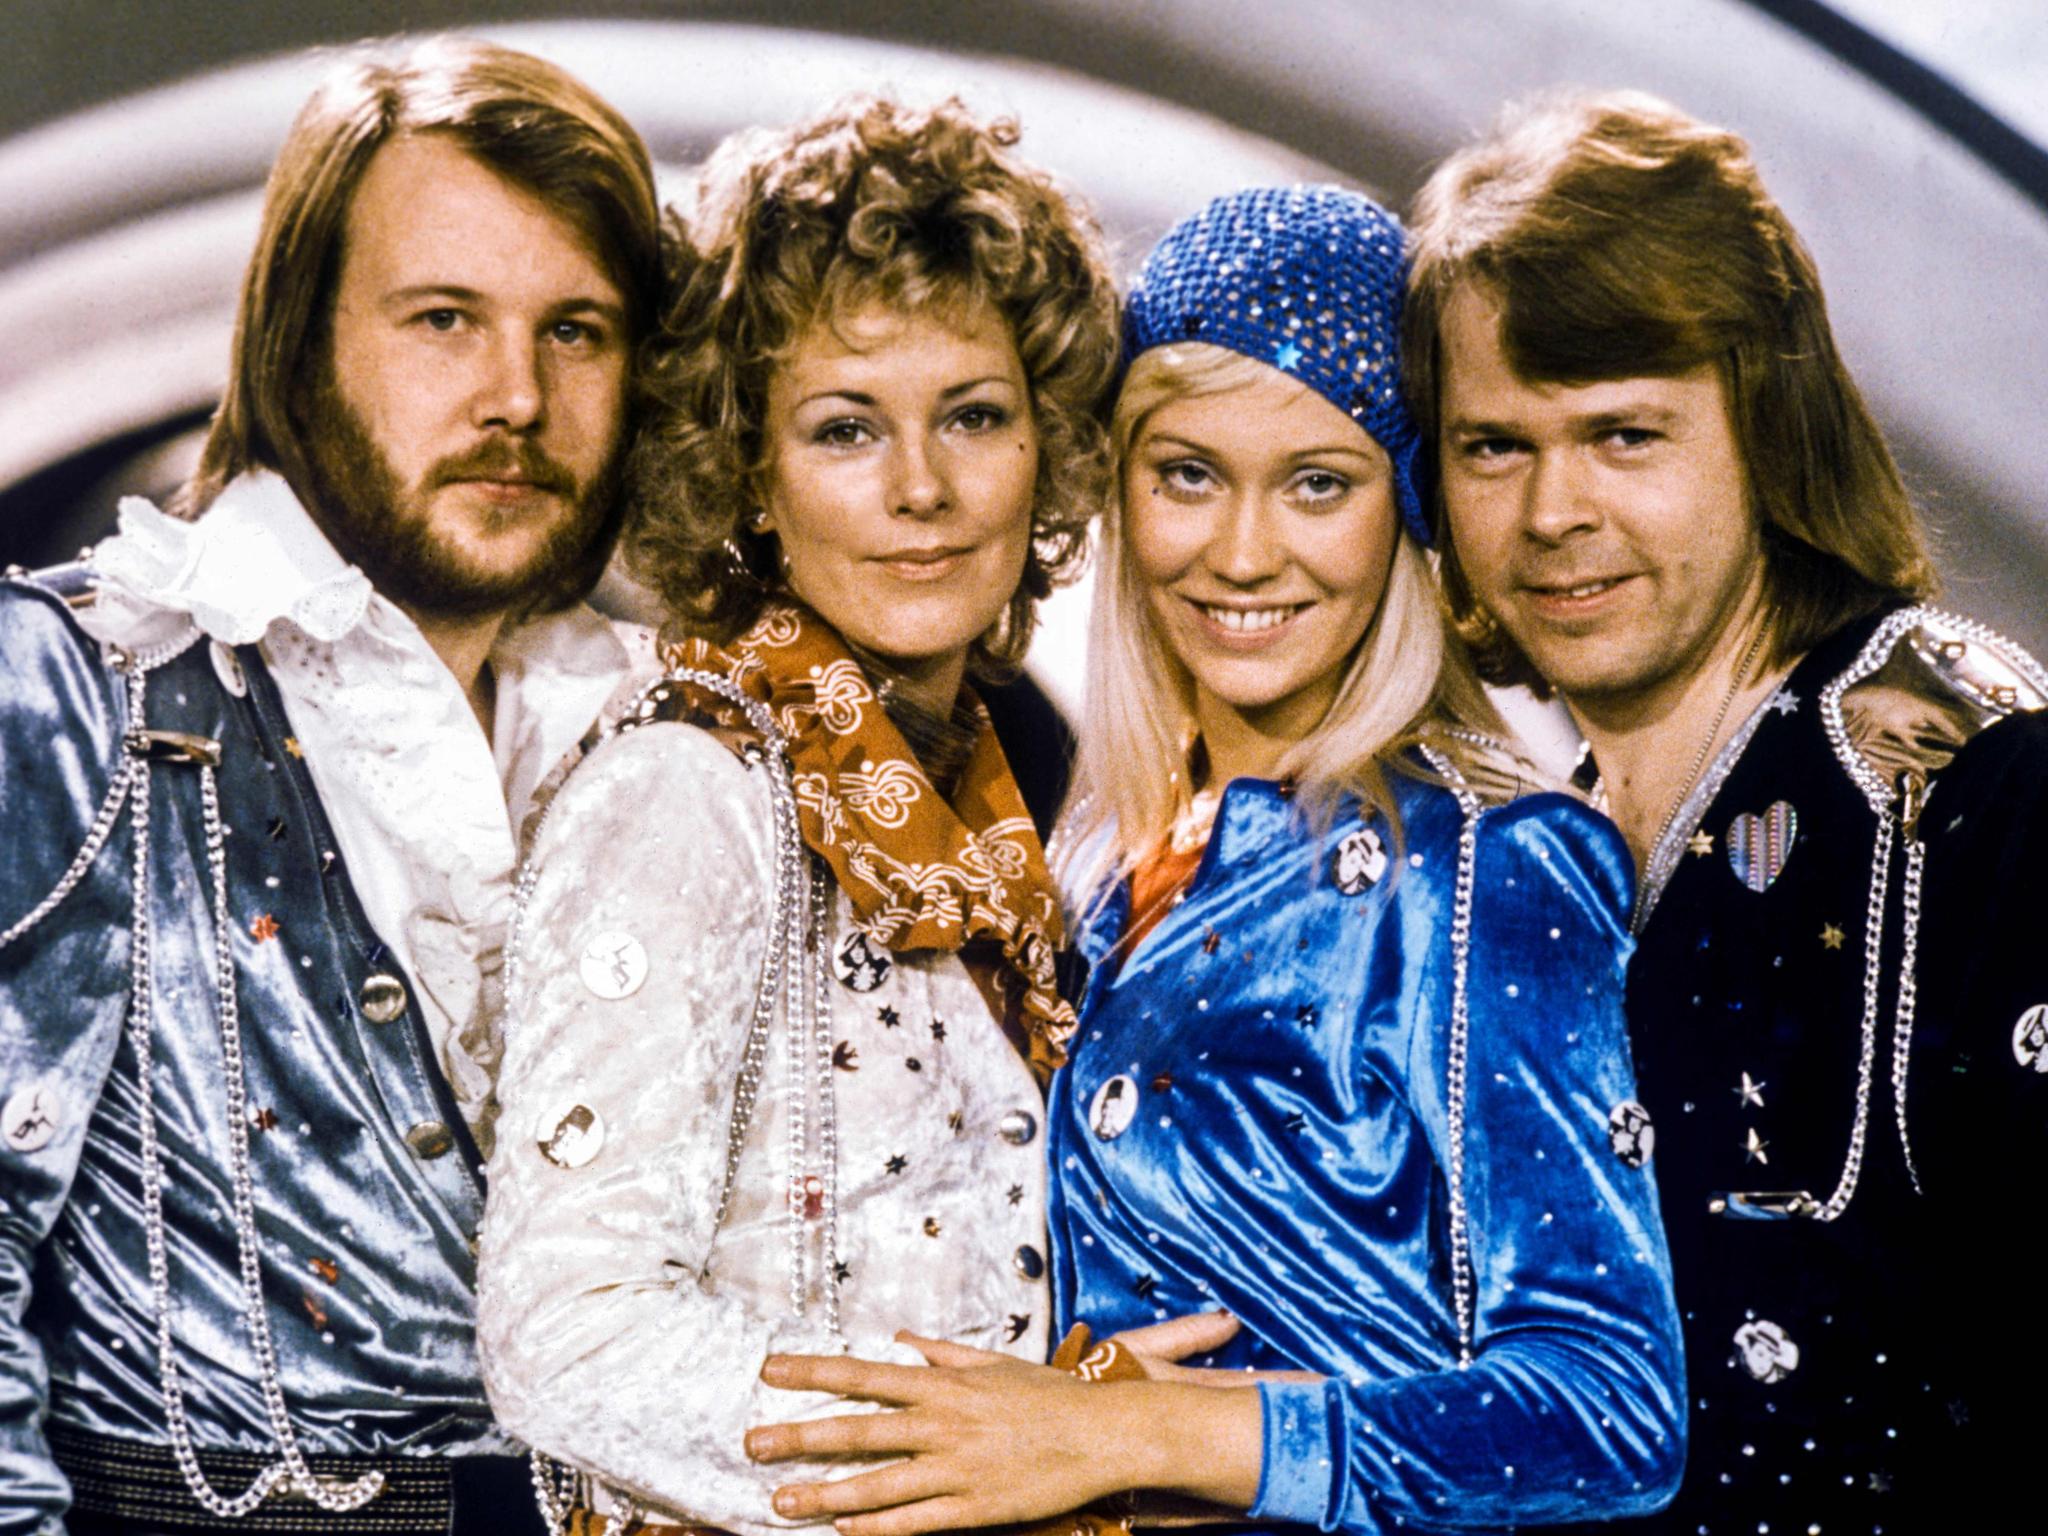 ABBA was the confidence boosting answer to a young boy's S.O.S.